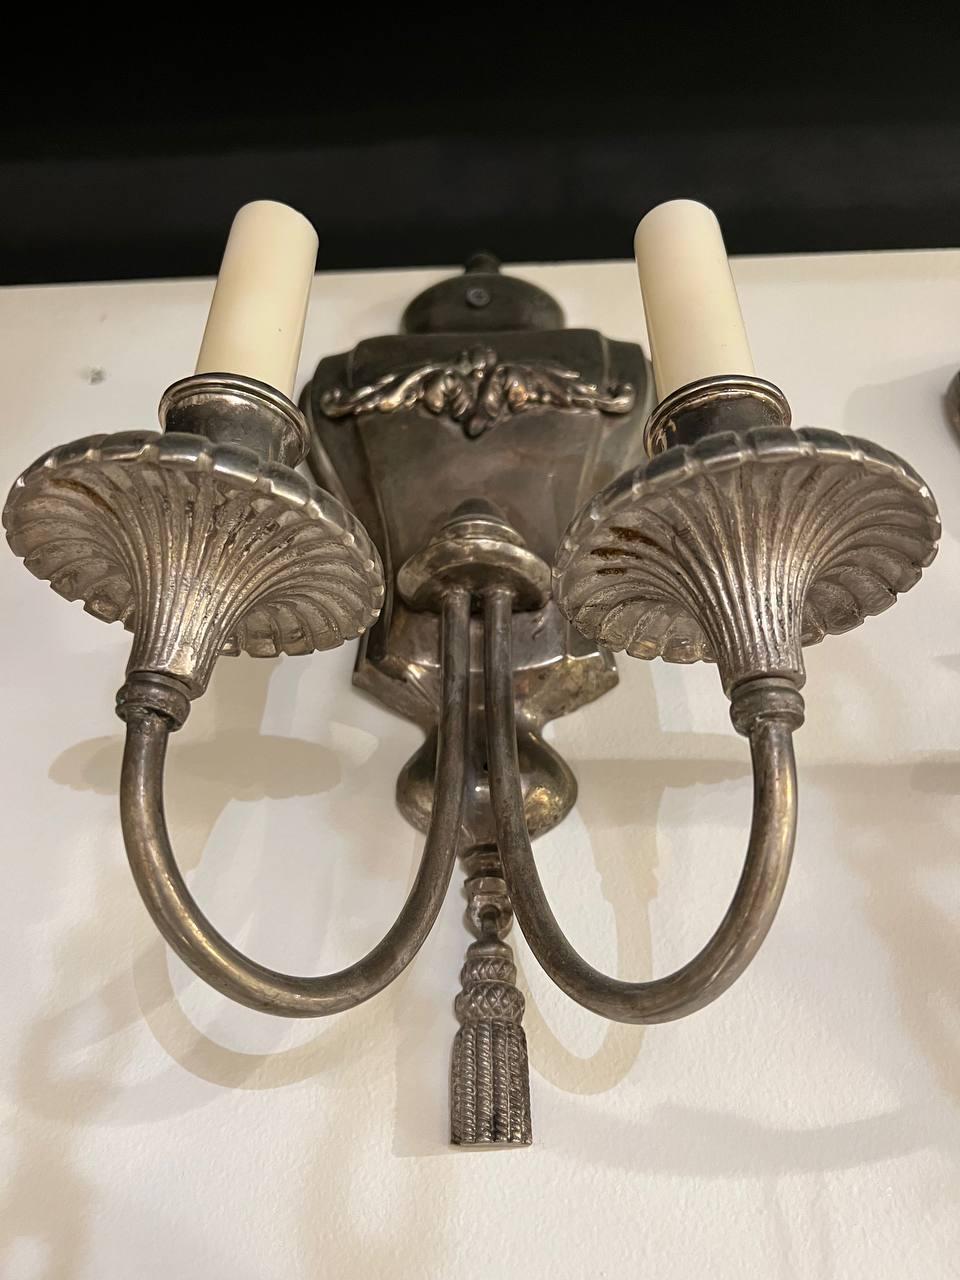 1930's English Silver Plated Sconces with 2 lights In Good Condition For Sale In New York, NY